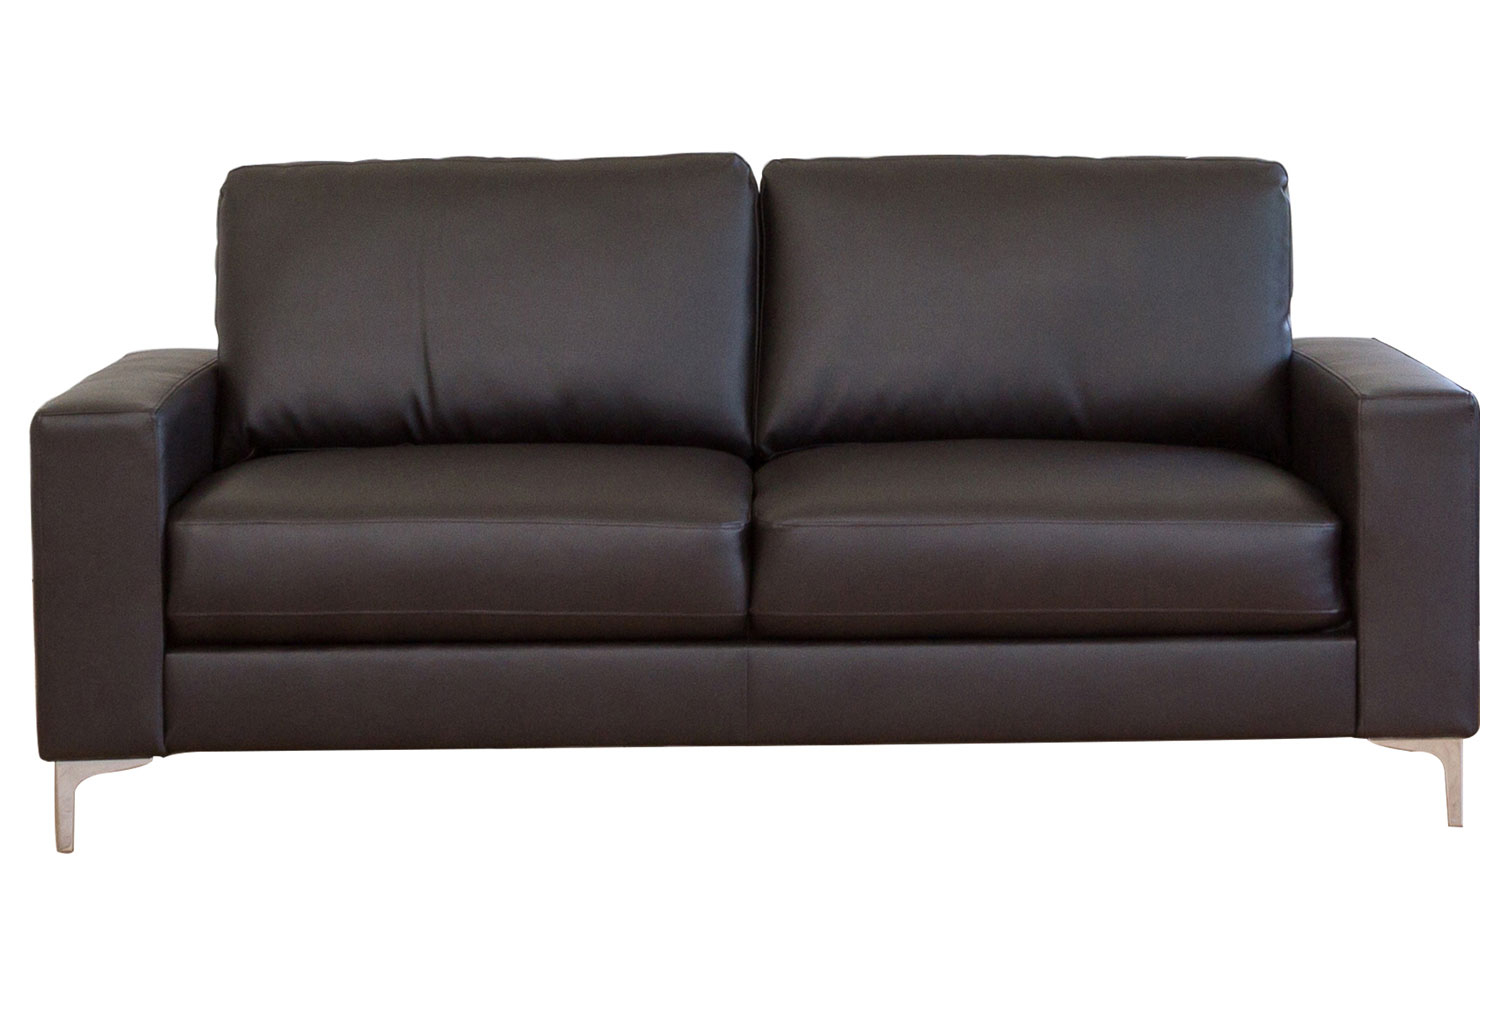 Lendl Leather 3 Seater Reception Sofa, Brown